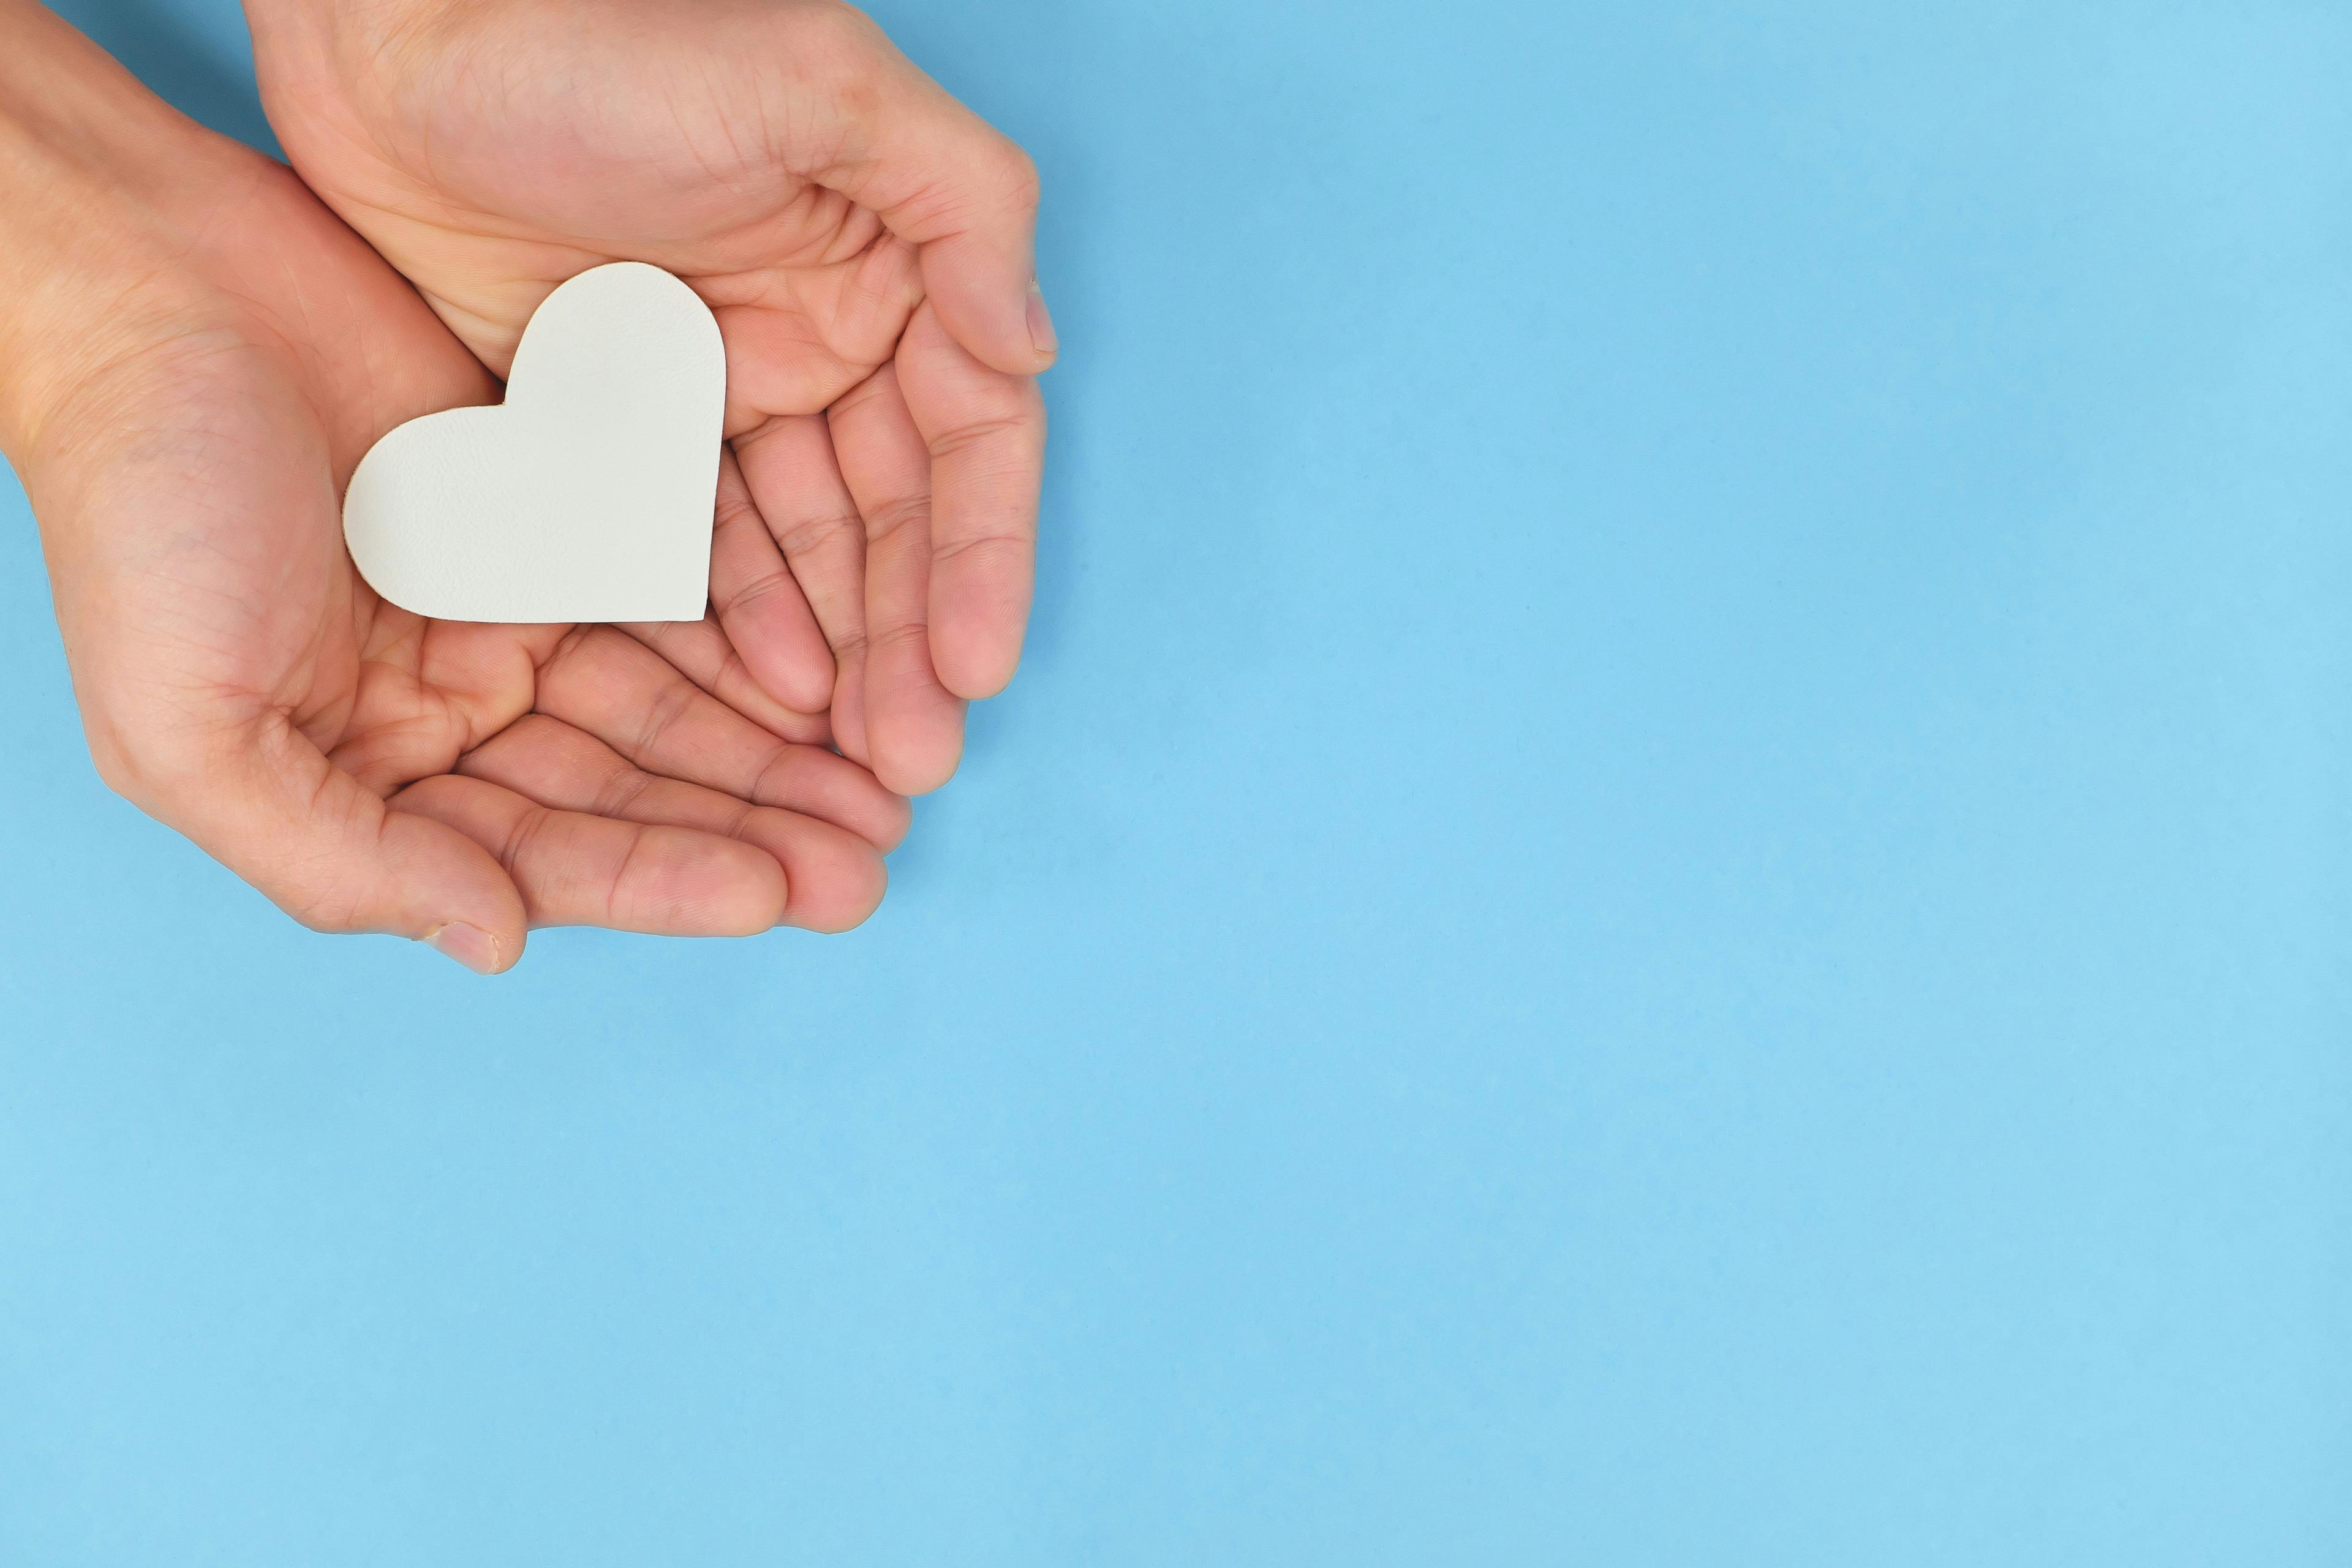 Hands holding a white heart in blue background. Charity, pure love and kindness concept.  | Image credit: © sulit.photos